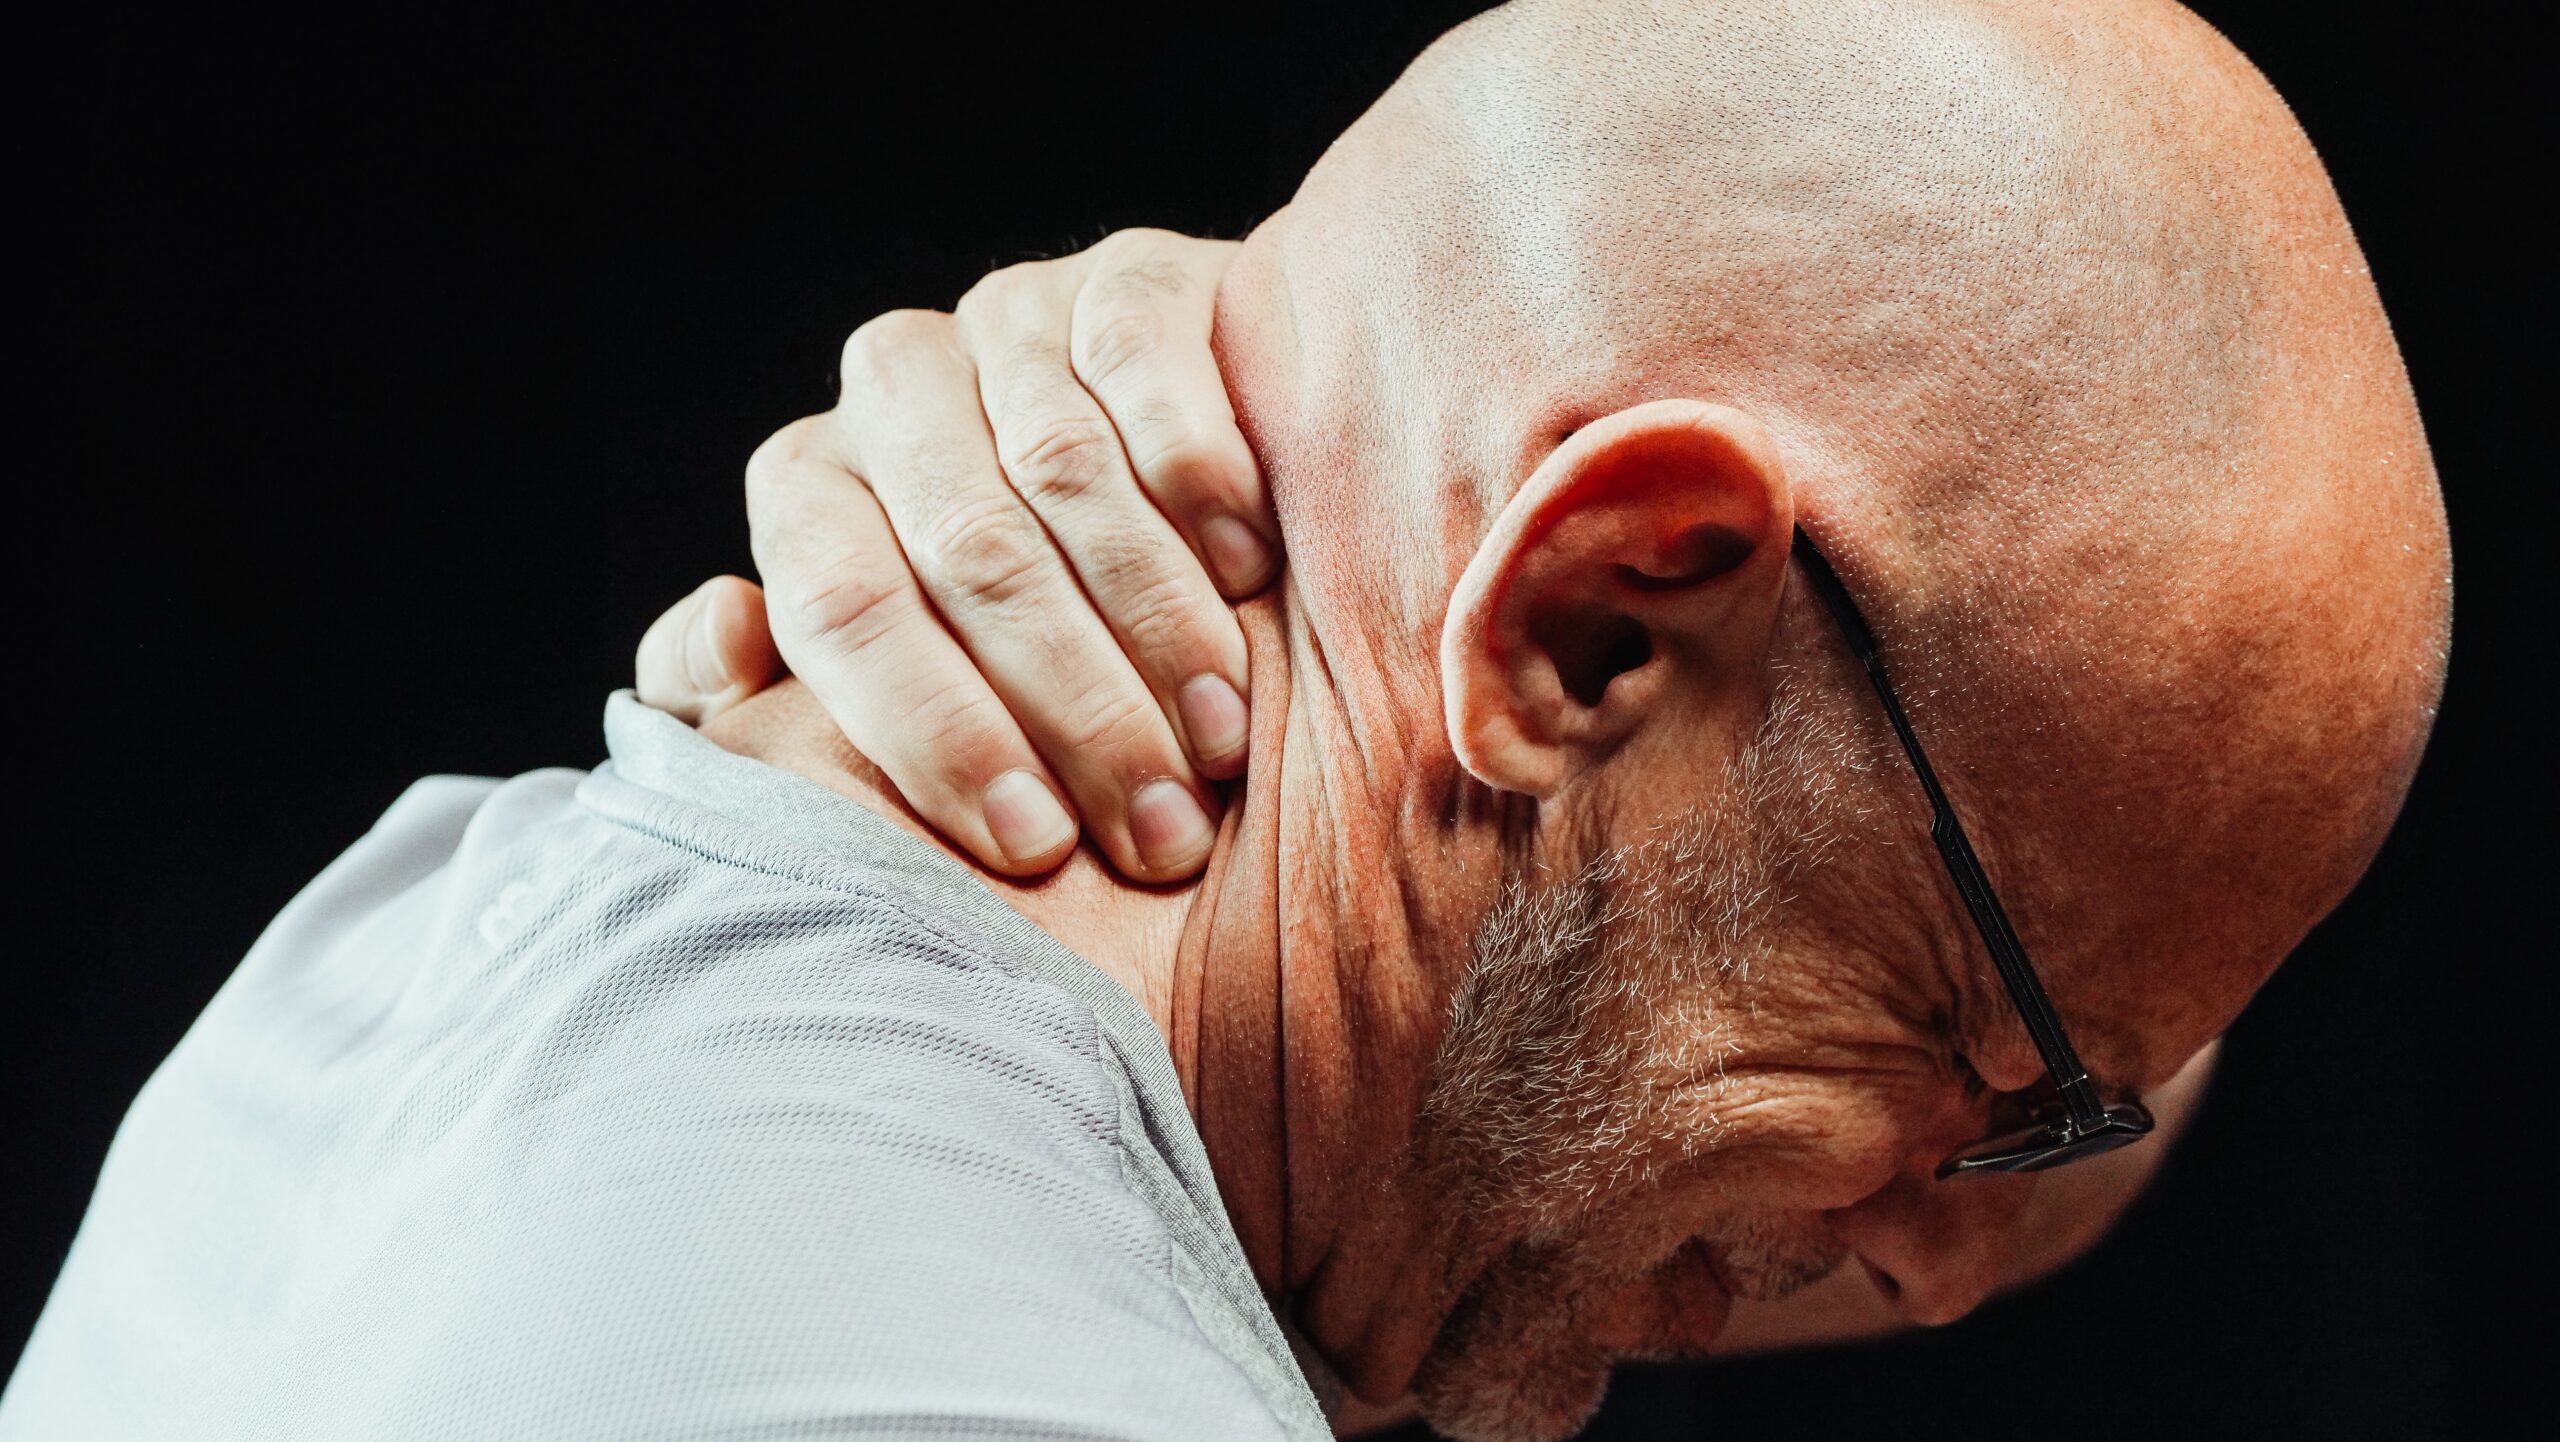 An older man grabbing the back of his neck and is visibly in pain.